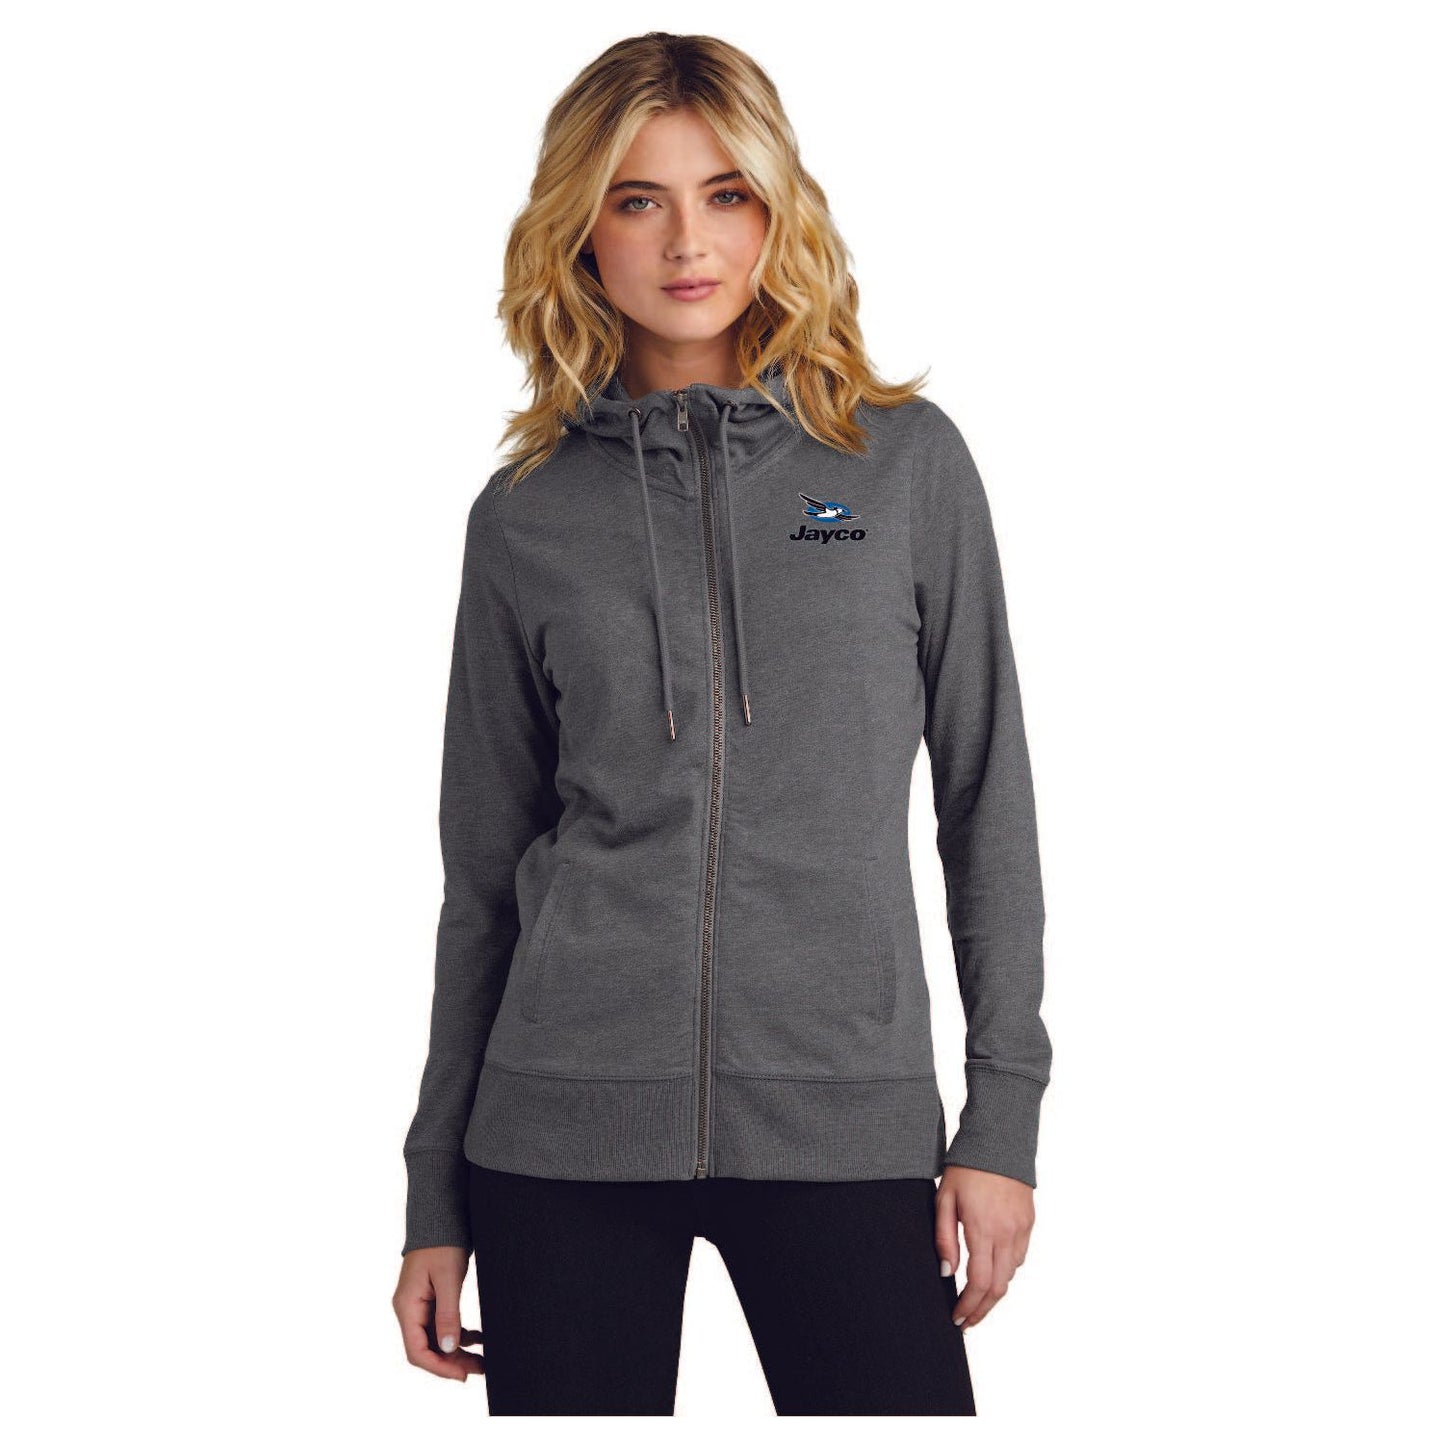 District® Women’s Featherweight French Terry™ Full-Zip Hoodie - DT673